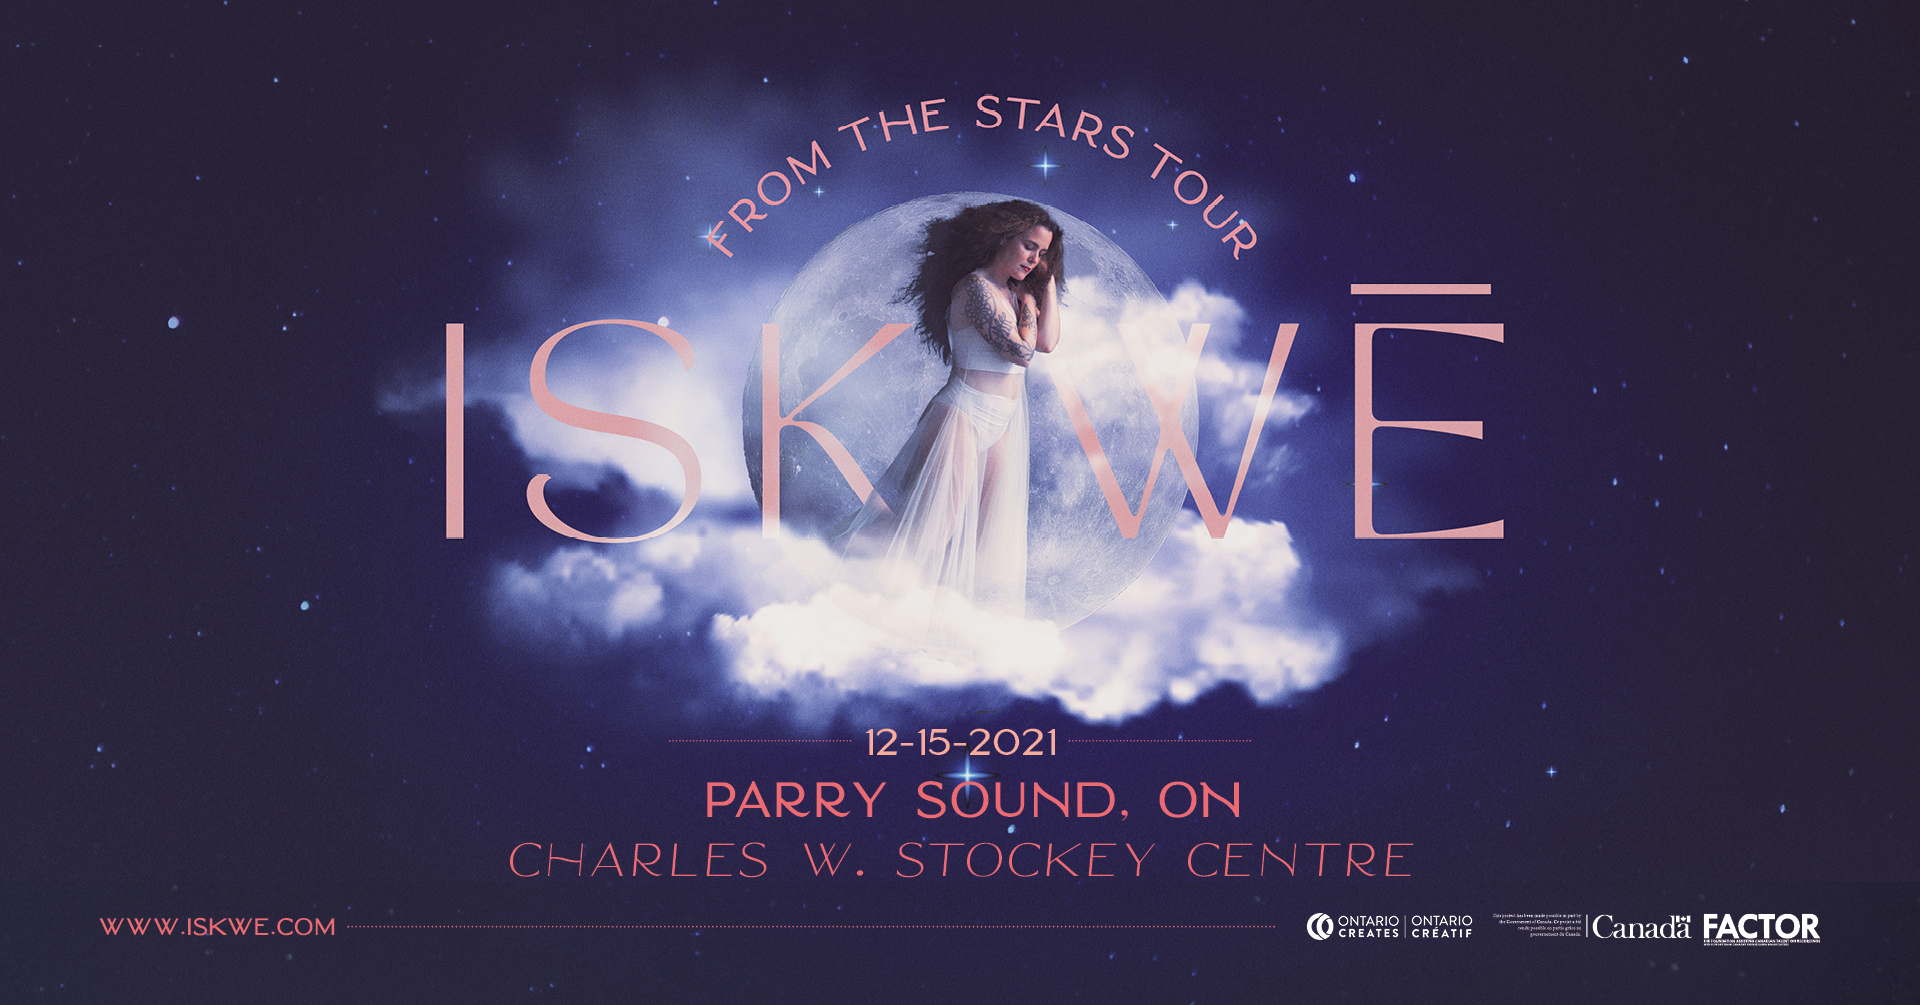 iskwē at The Stockey Centre in Parry Sound on December 15 2021